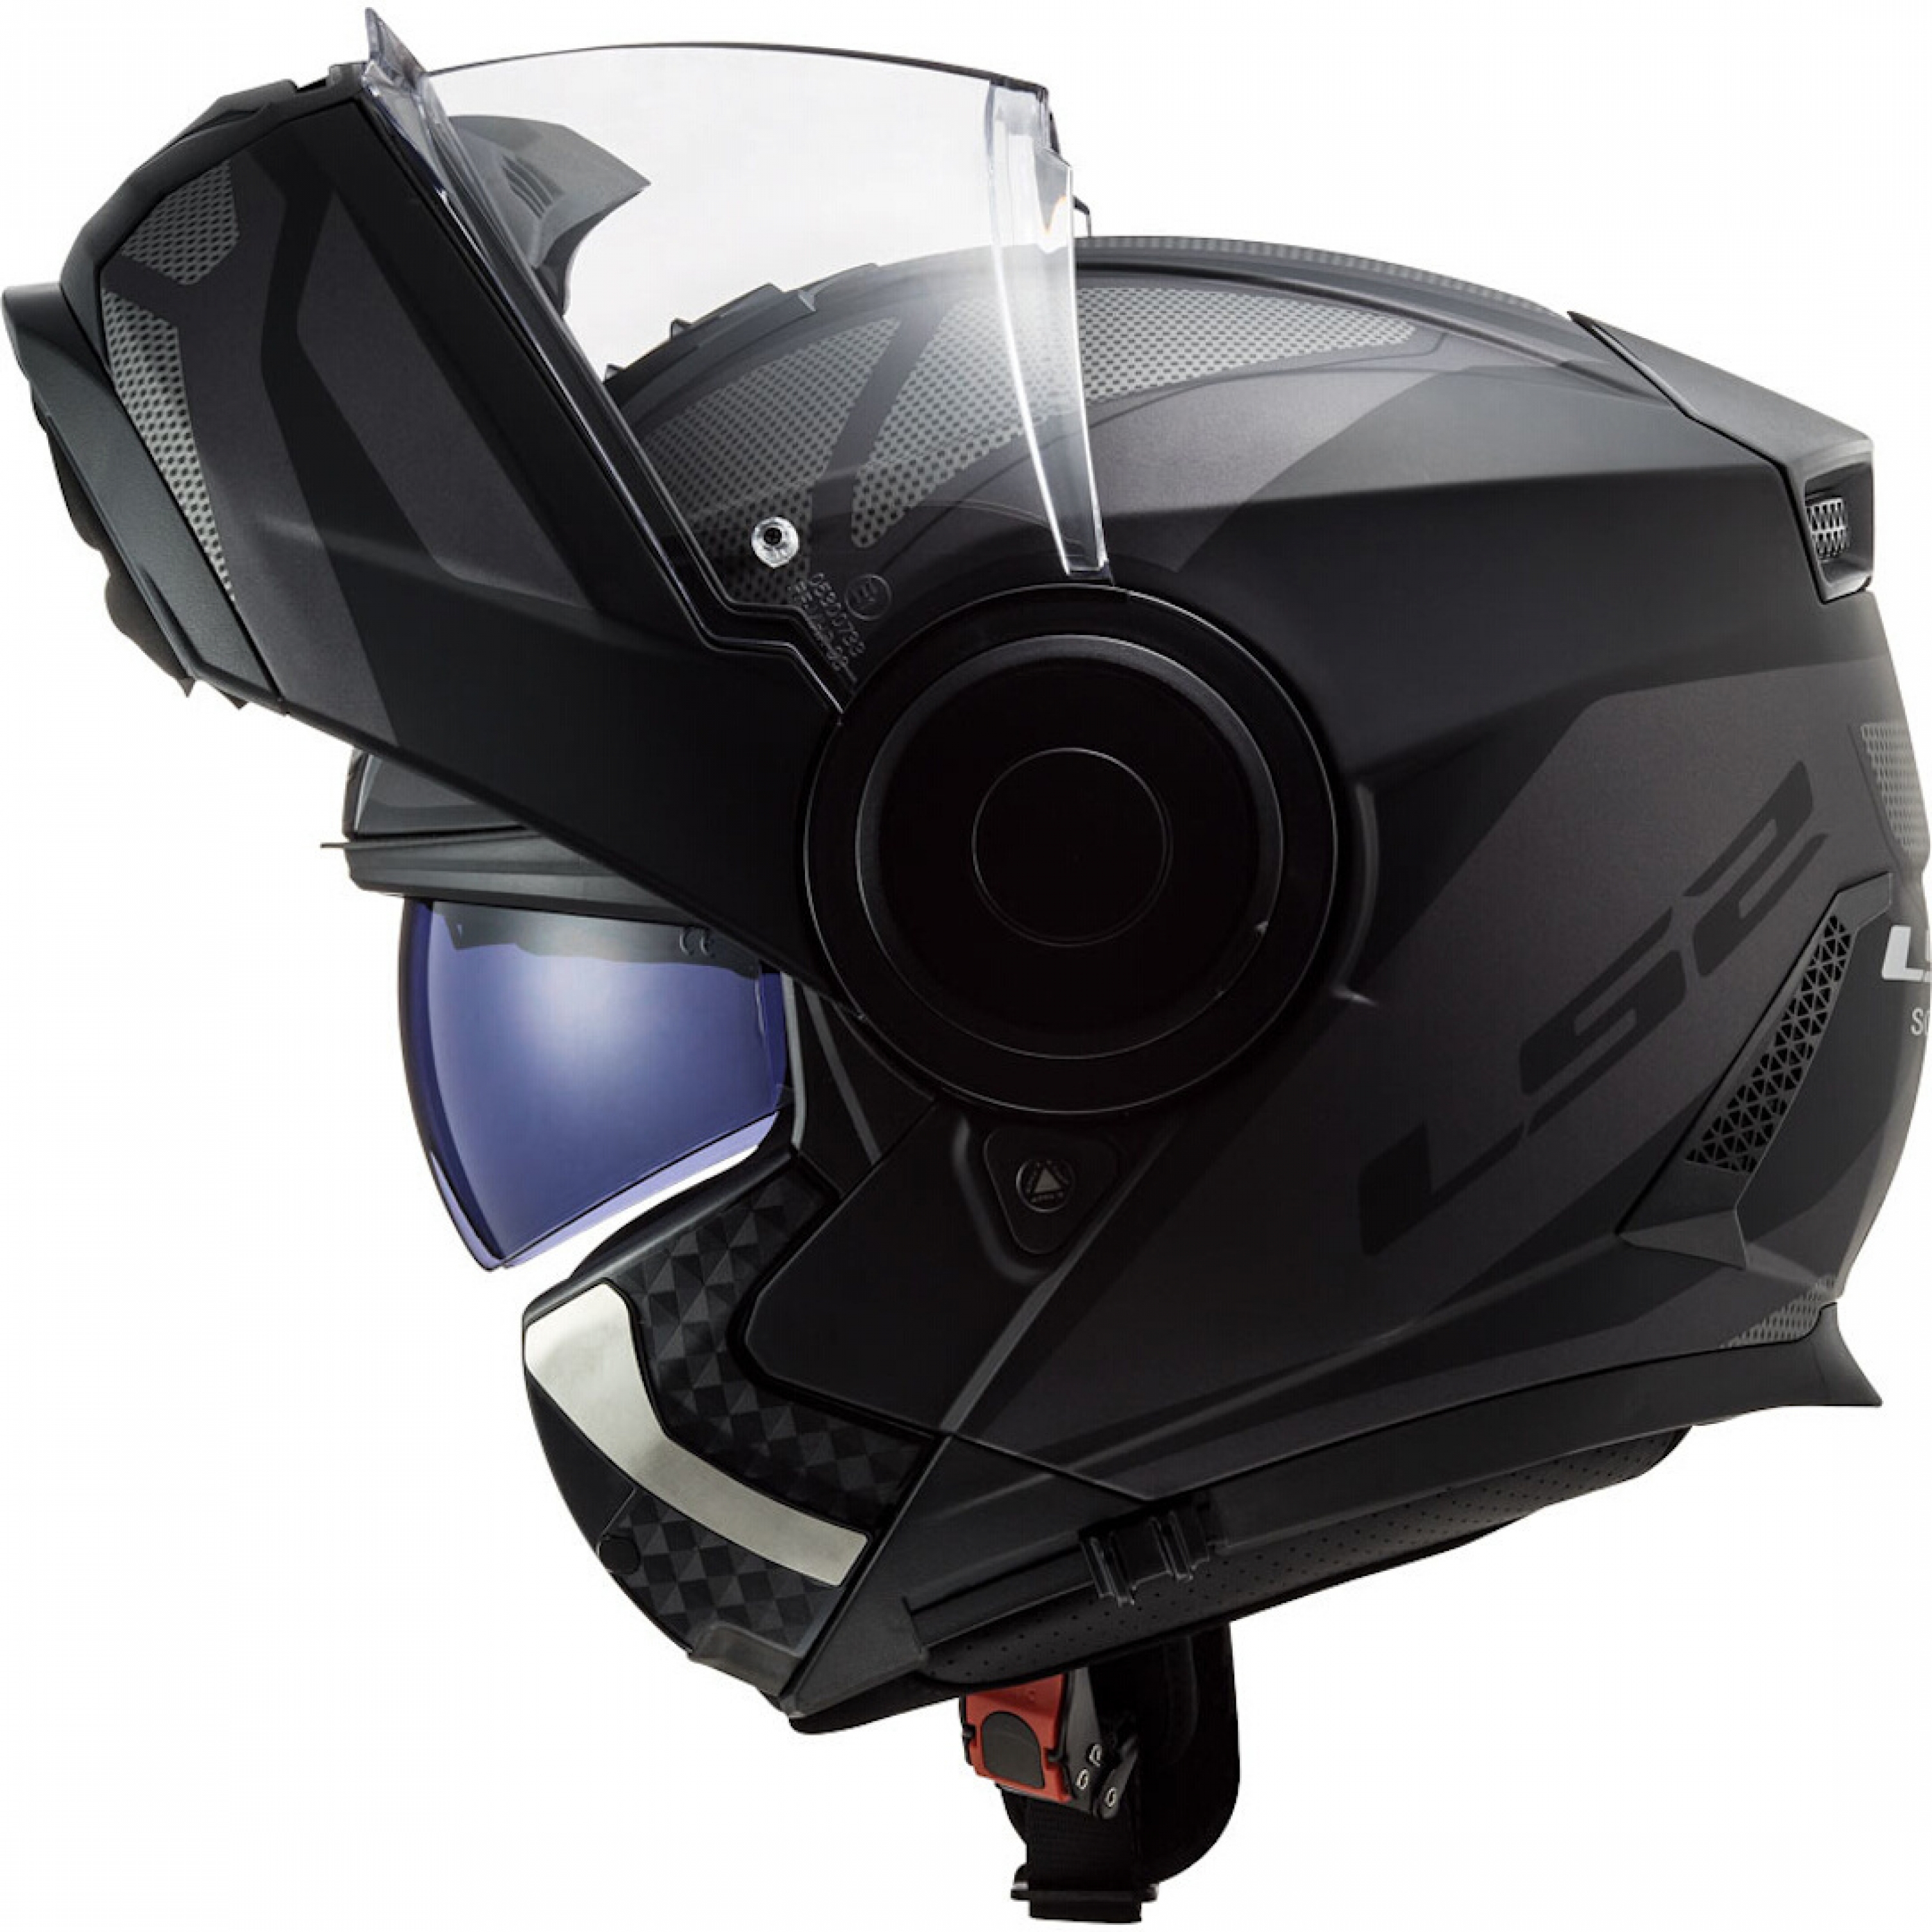 LS2 FF902 Scope "Axis", Helm